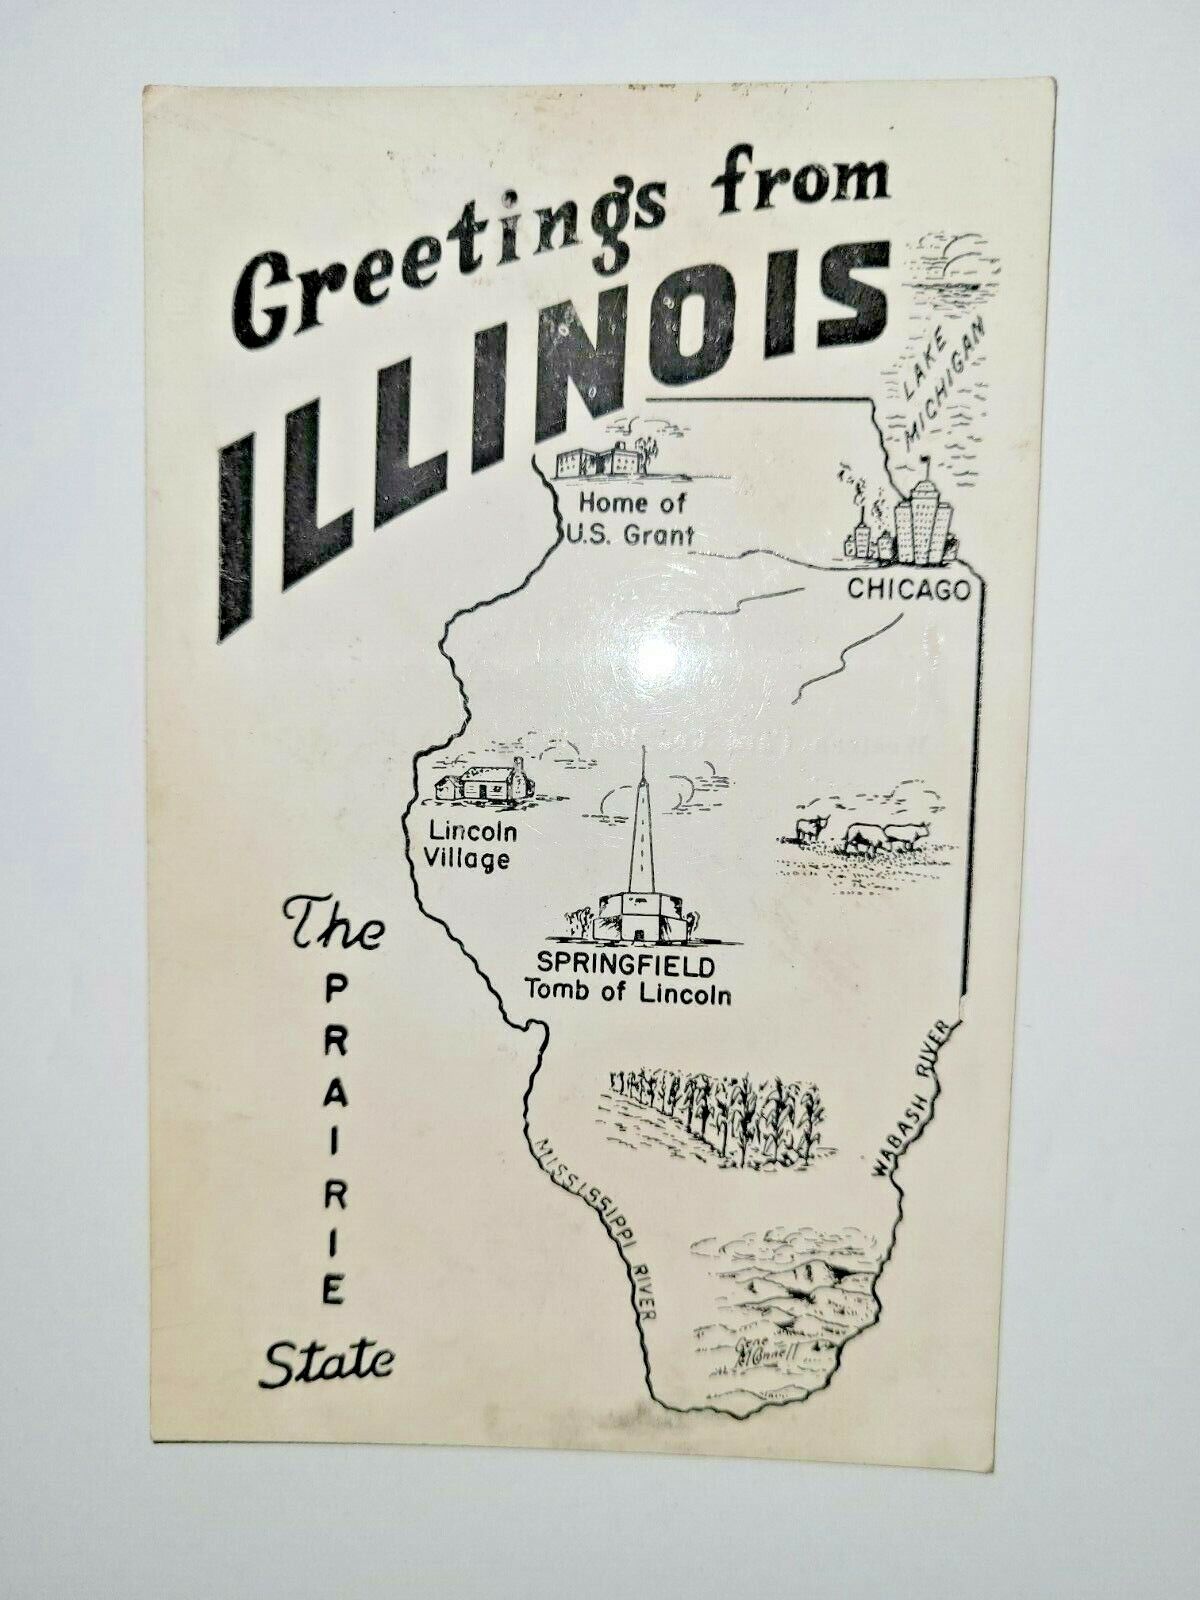 State PostCard Vintage Post Card Greetings from Illinois Souvenir Blank Unposted